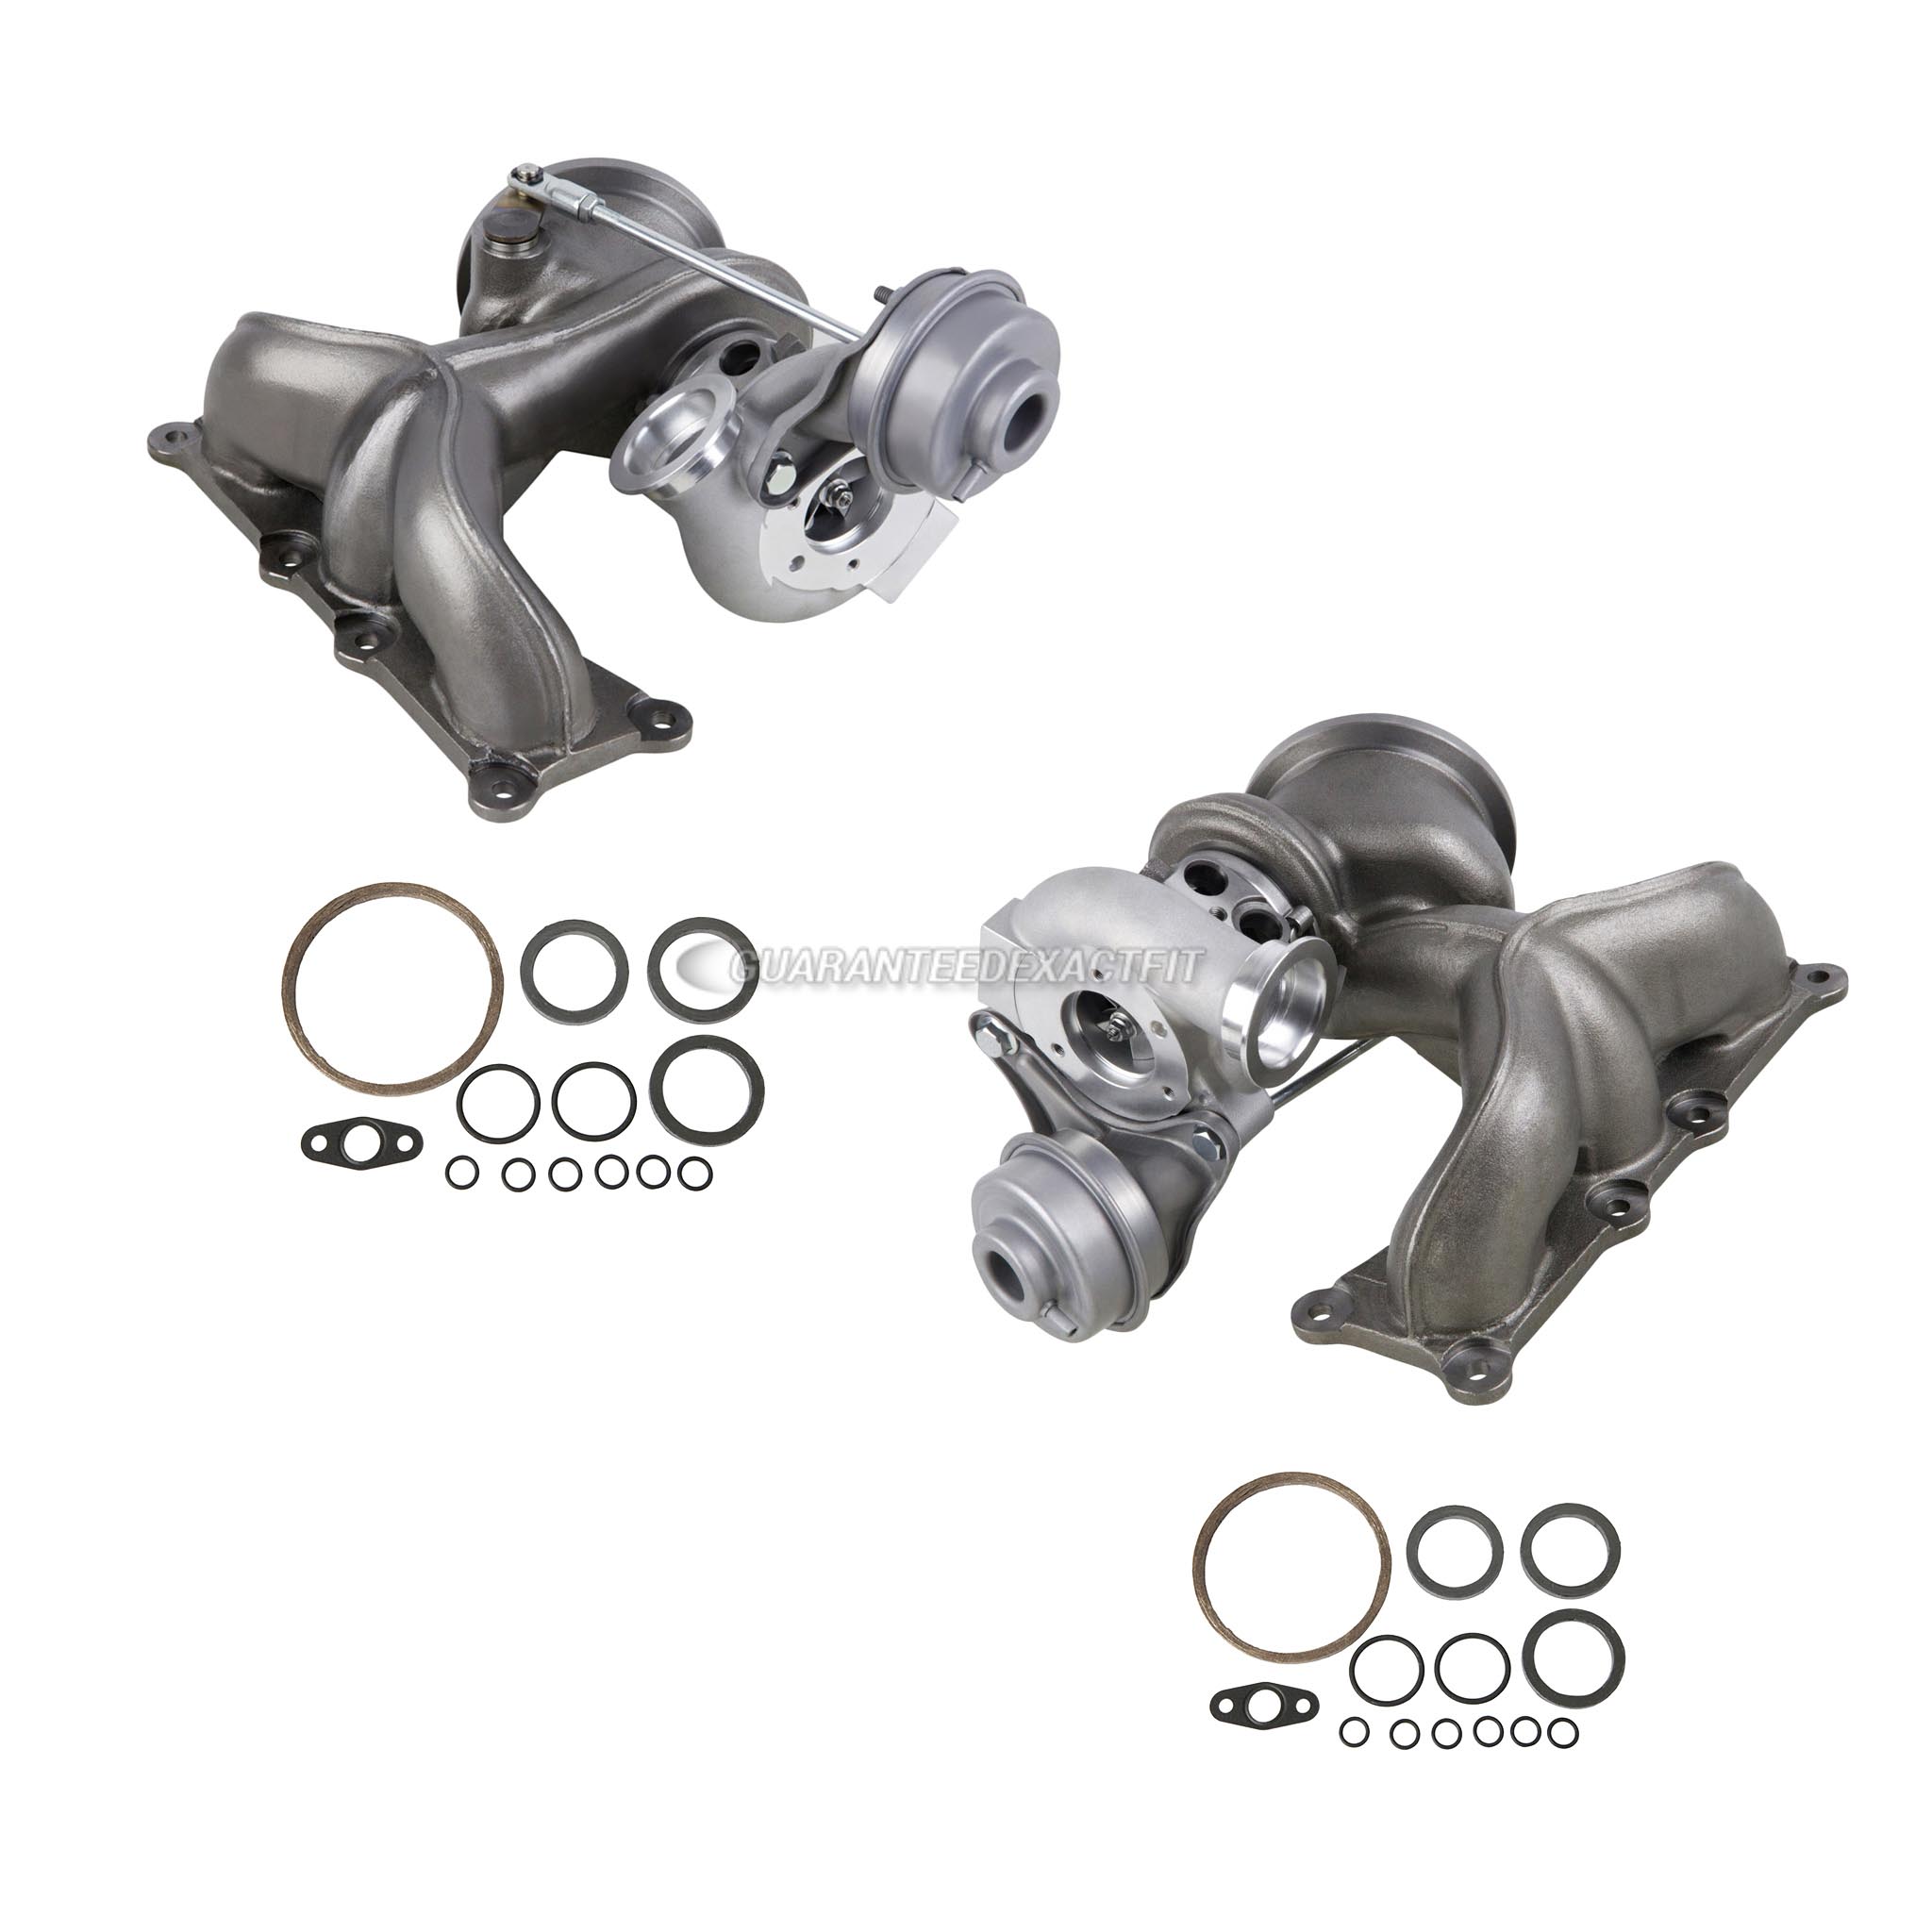  Bmw 740 Turbocharger and Installation Accessory Kit 